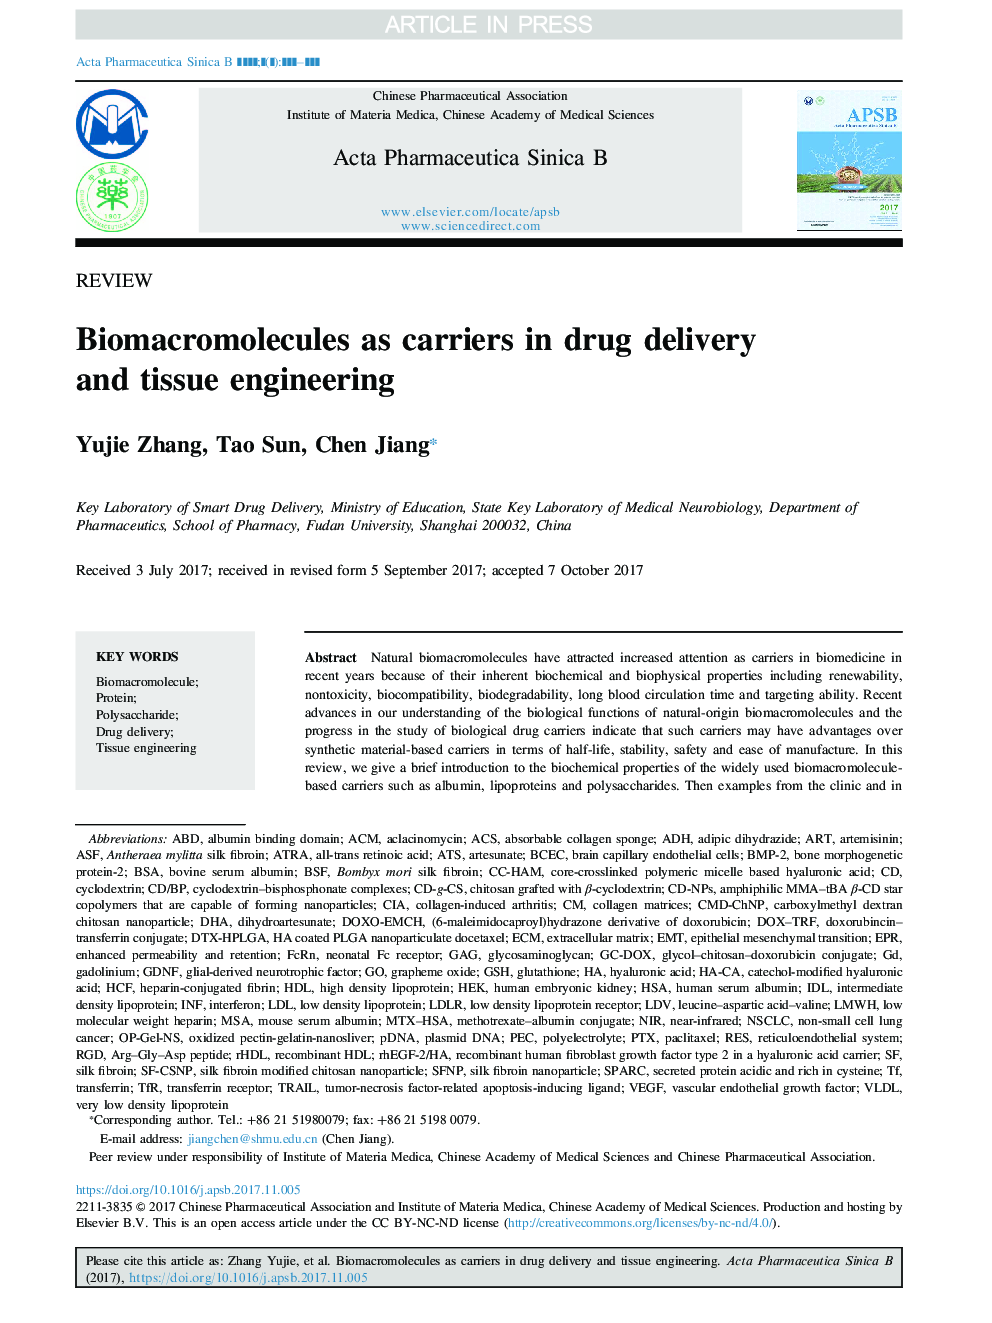 Biomacromolecules as carriers in drug delivery and tissue engineering